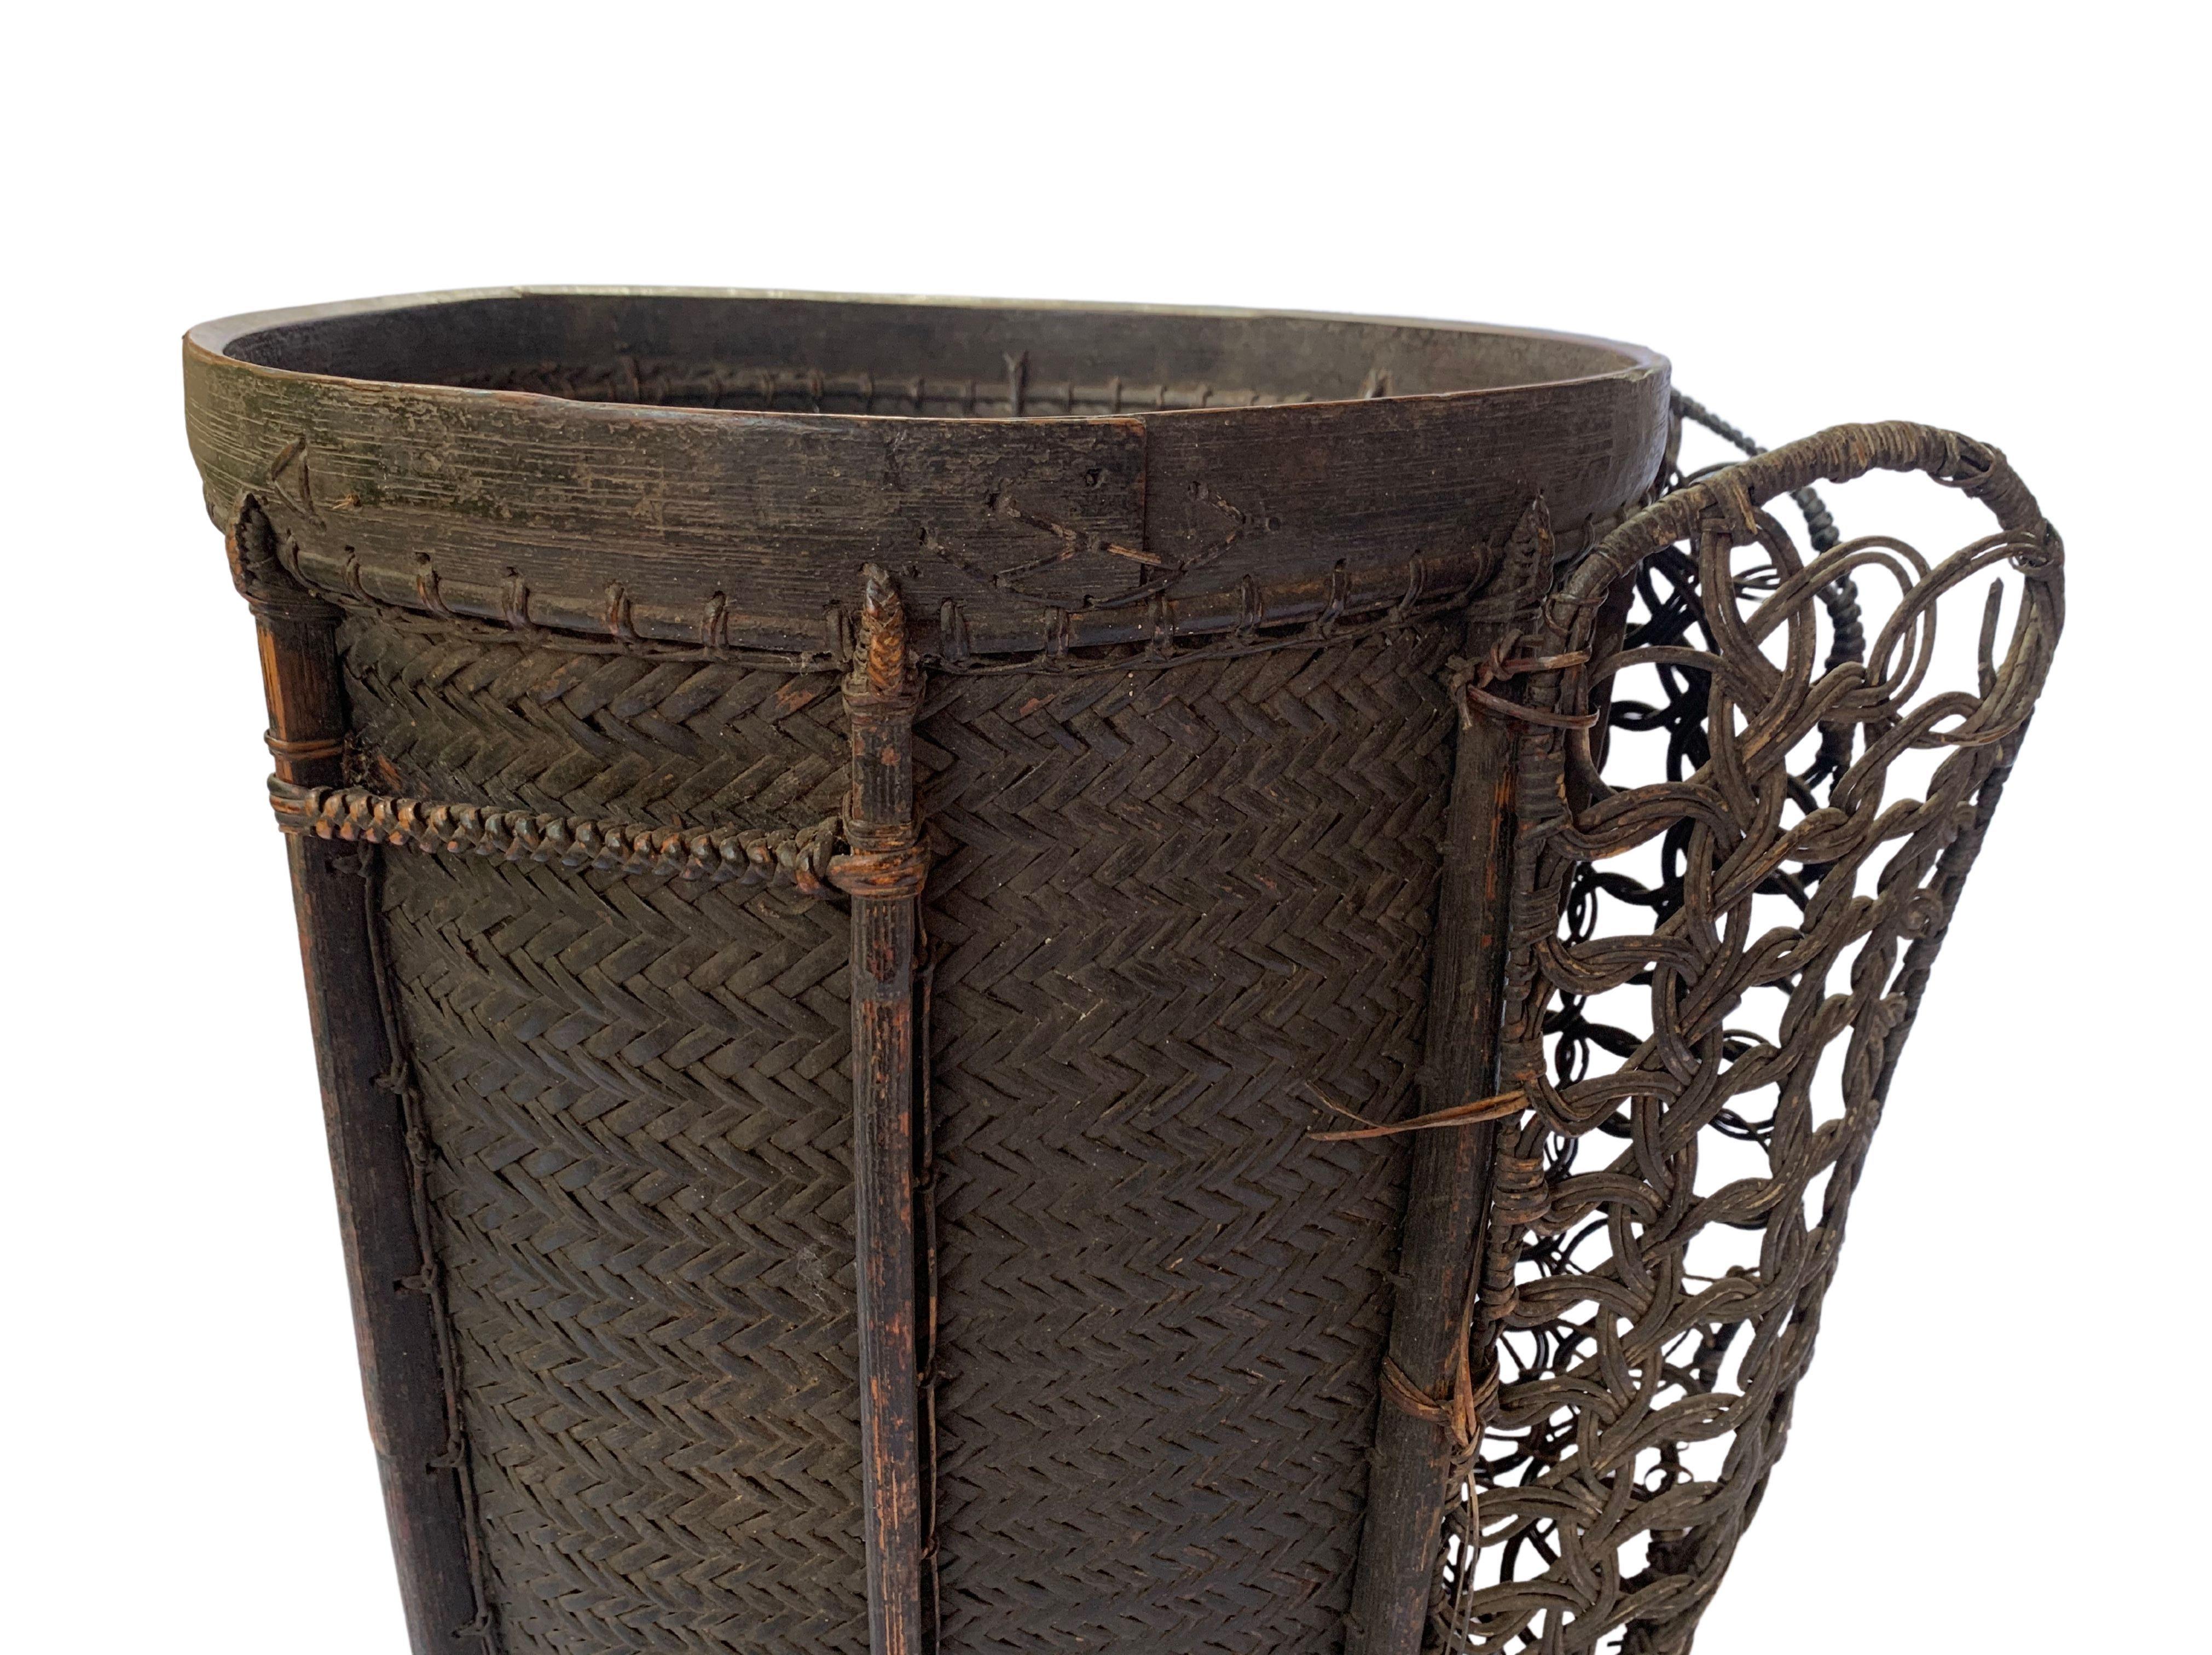 Other Vintage Rattan Basket Dayak Tribe Hand-Woven from Kalimantan, Borneo For Sale